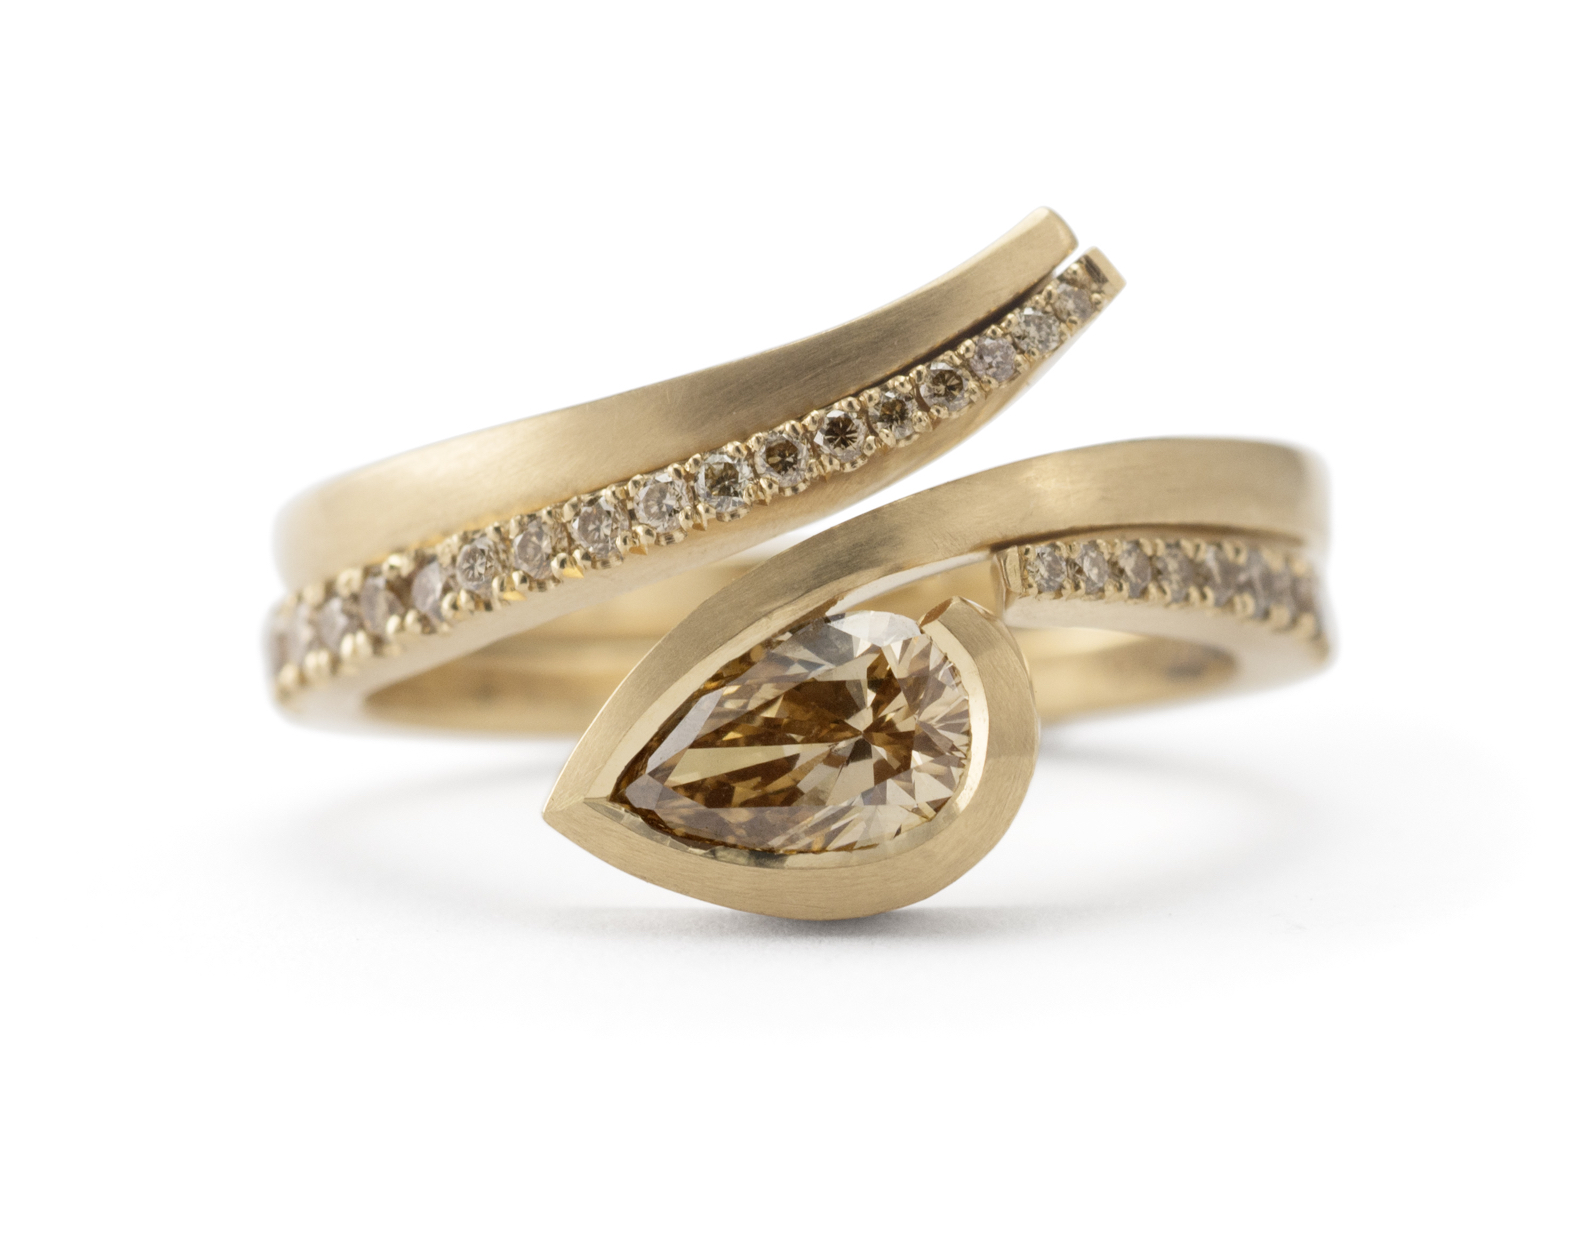 Twist cognac diamond engagement ring with fitted wedding band